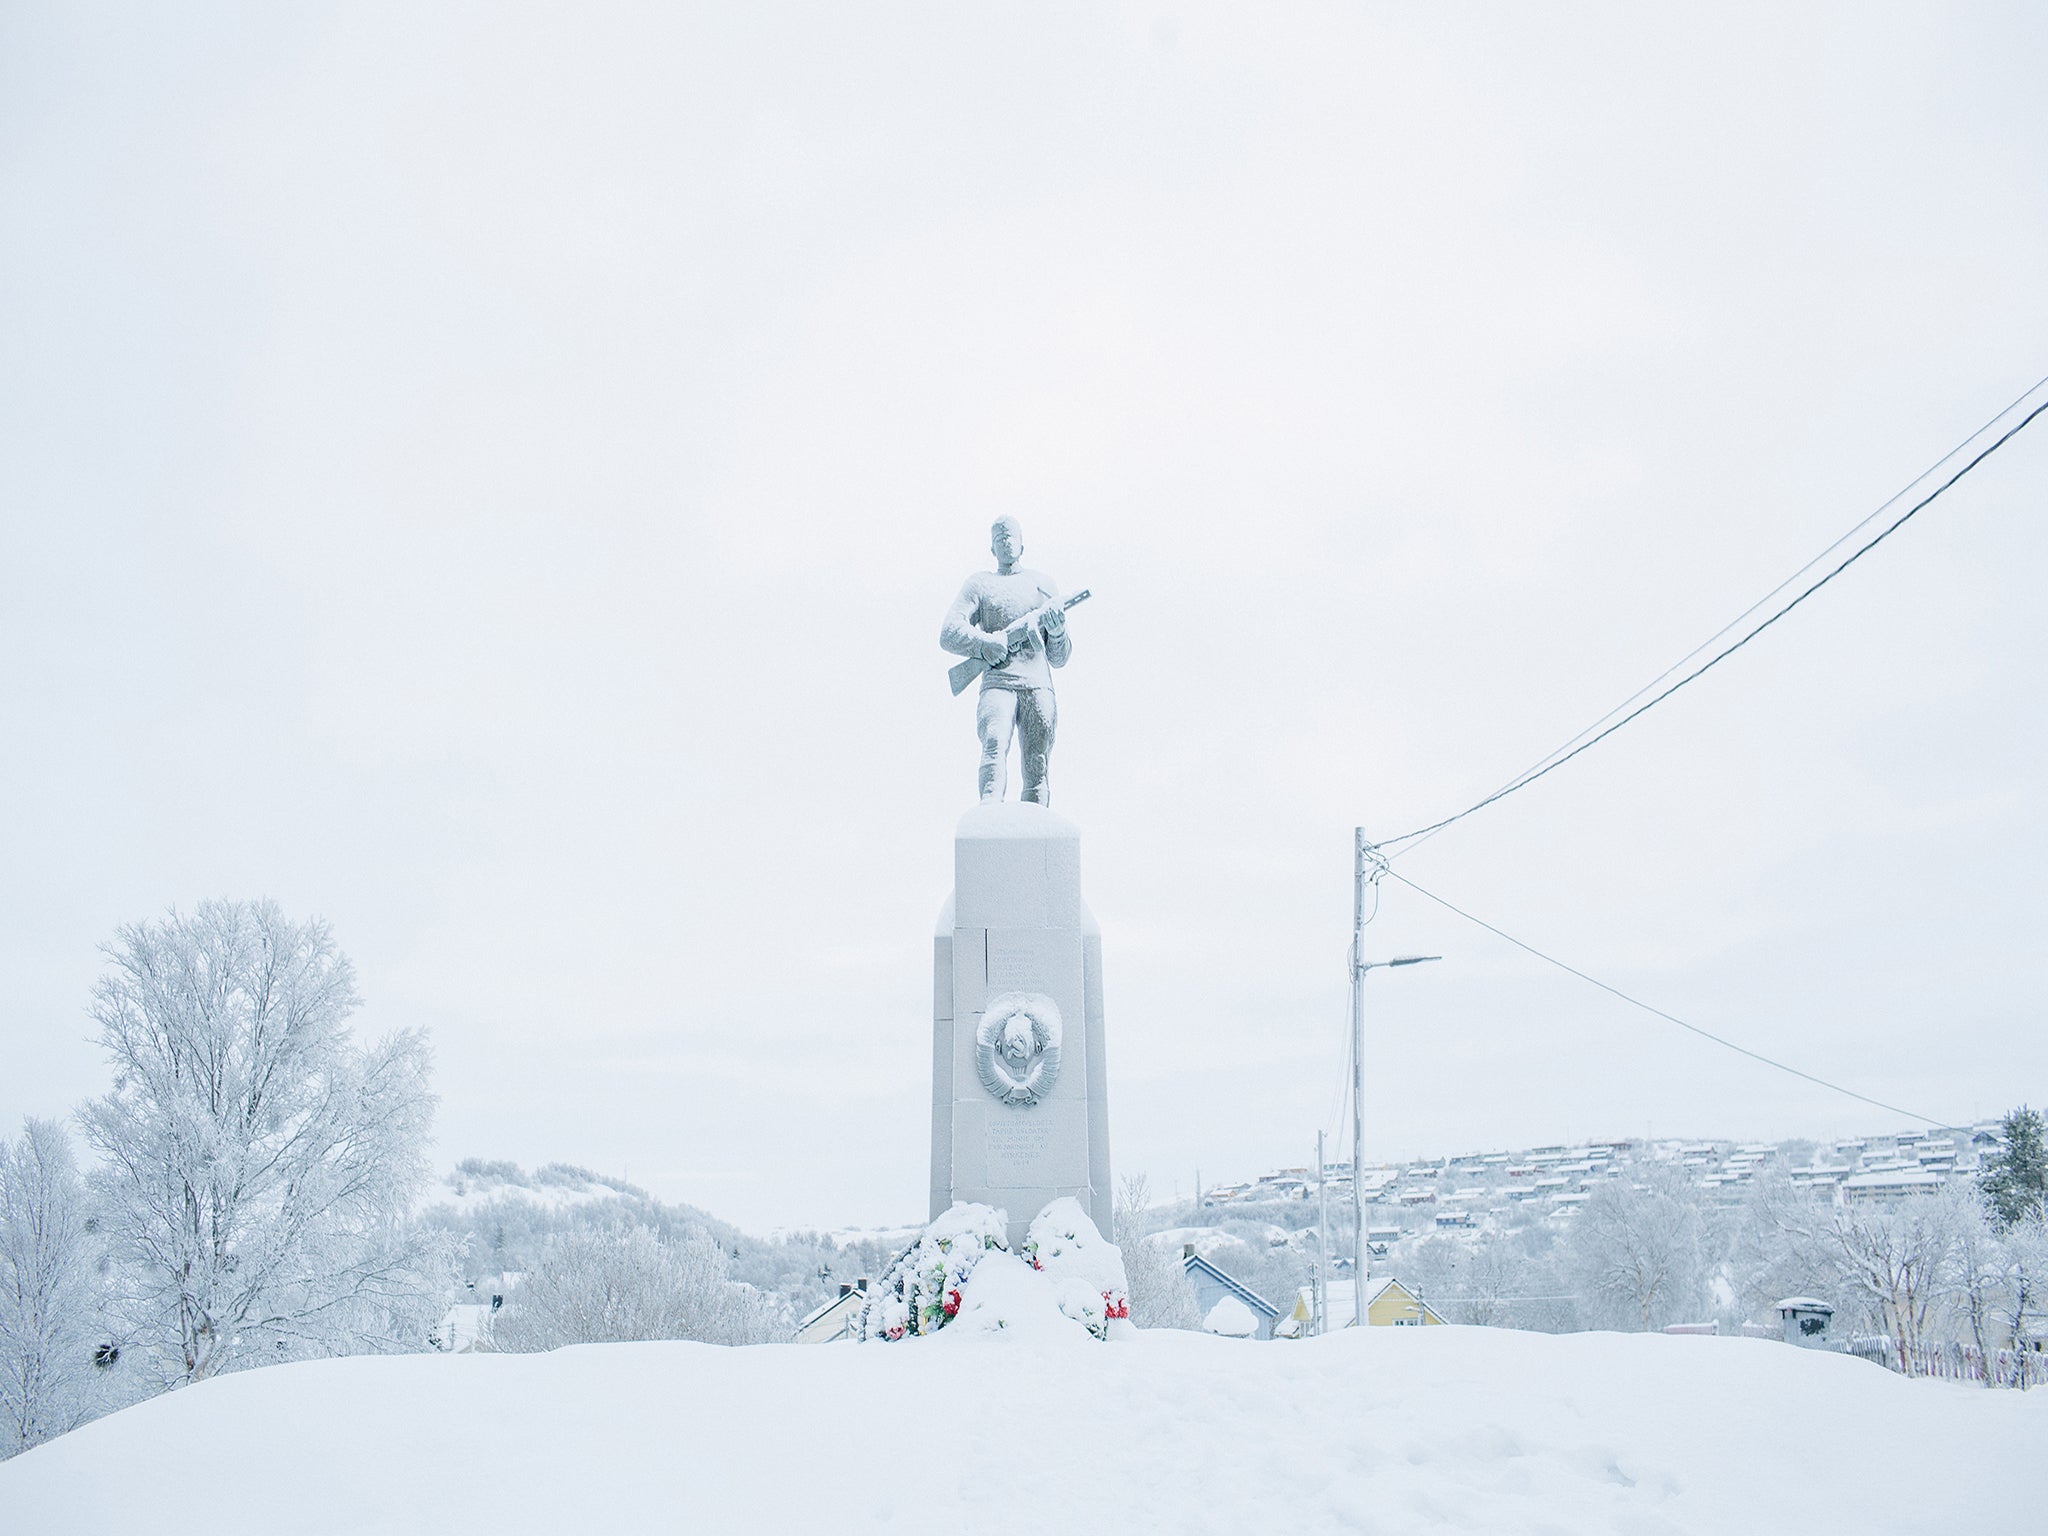 In Kirkenes is a Norwegian monument honouring the soldiers of the Soviet army who liberated the town from Nazi German occupation in 1944